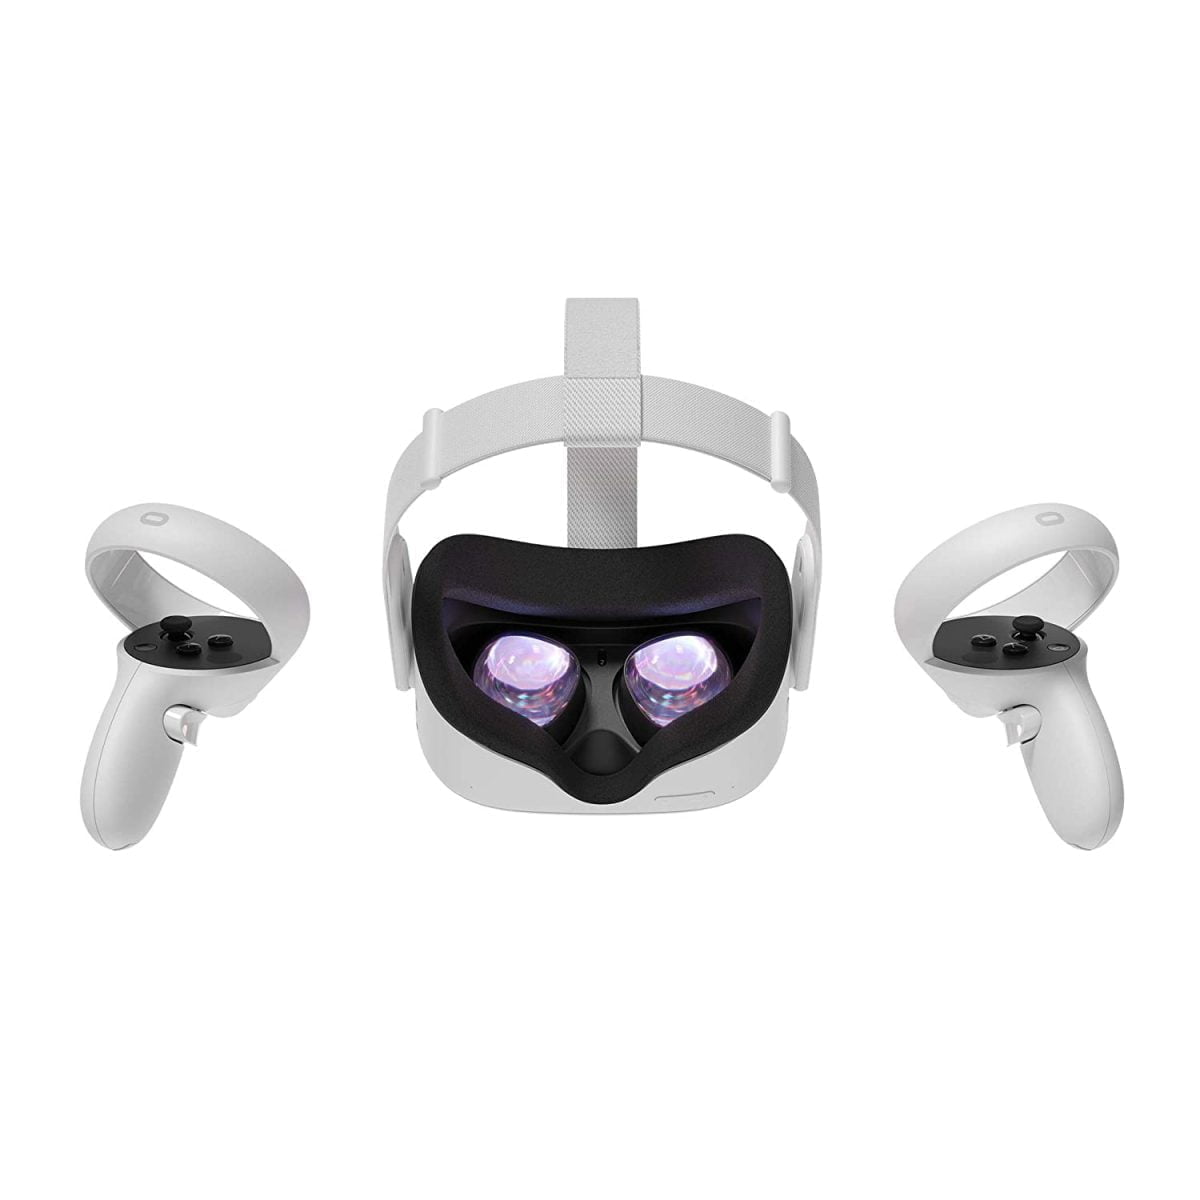 61Lspm4H5L. Sl1500 Https://Youtu.be/Atvgl9Wojsm Oculus Quest 2 Oculus Quest 2 — Advanced All-In-One Virtual Reality Headset — 64 Gb